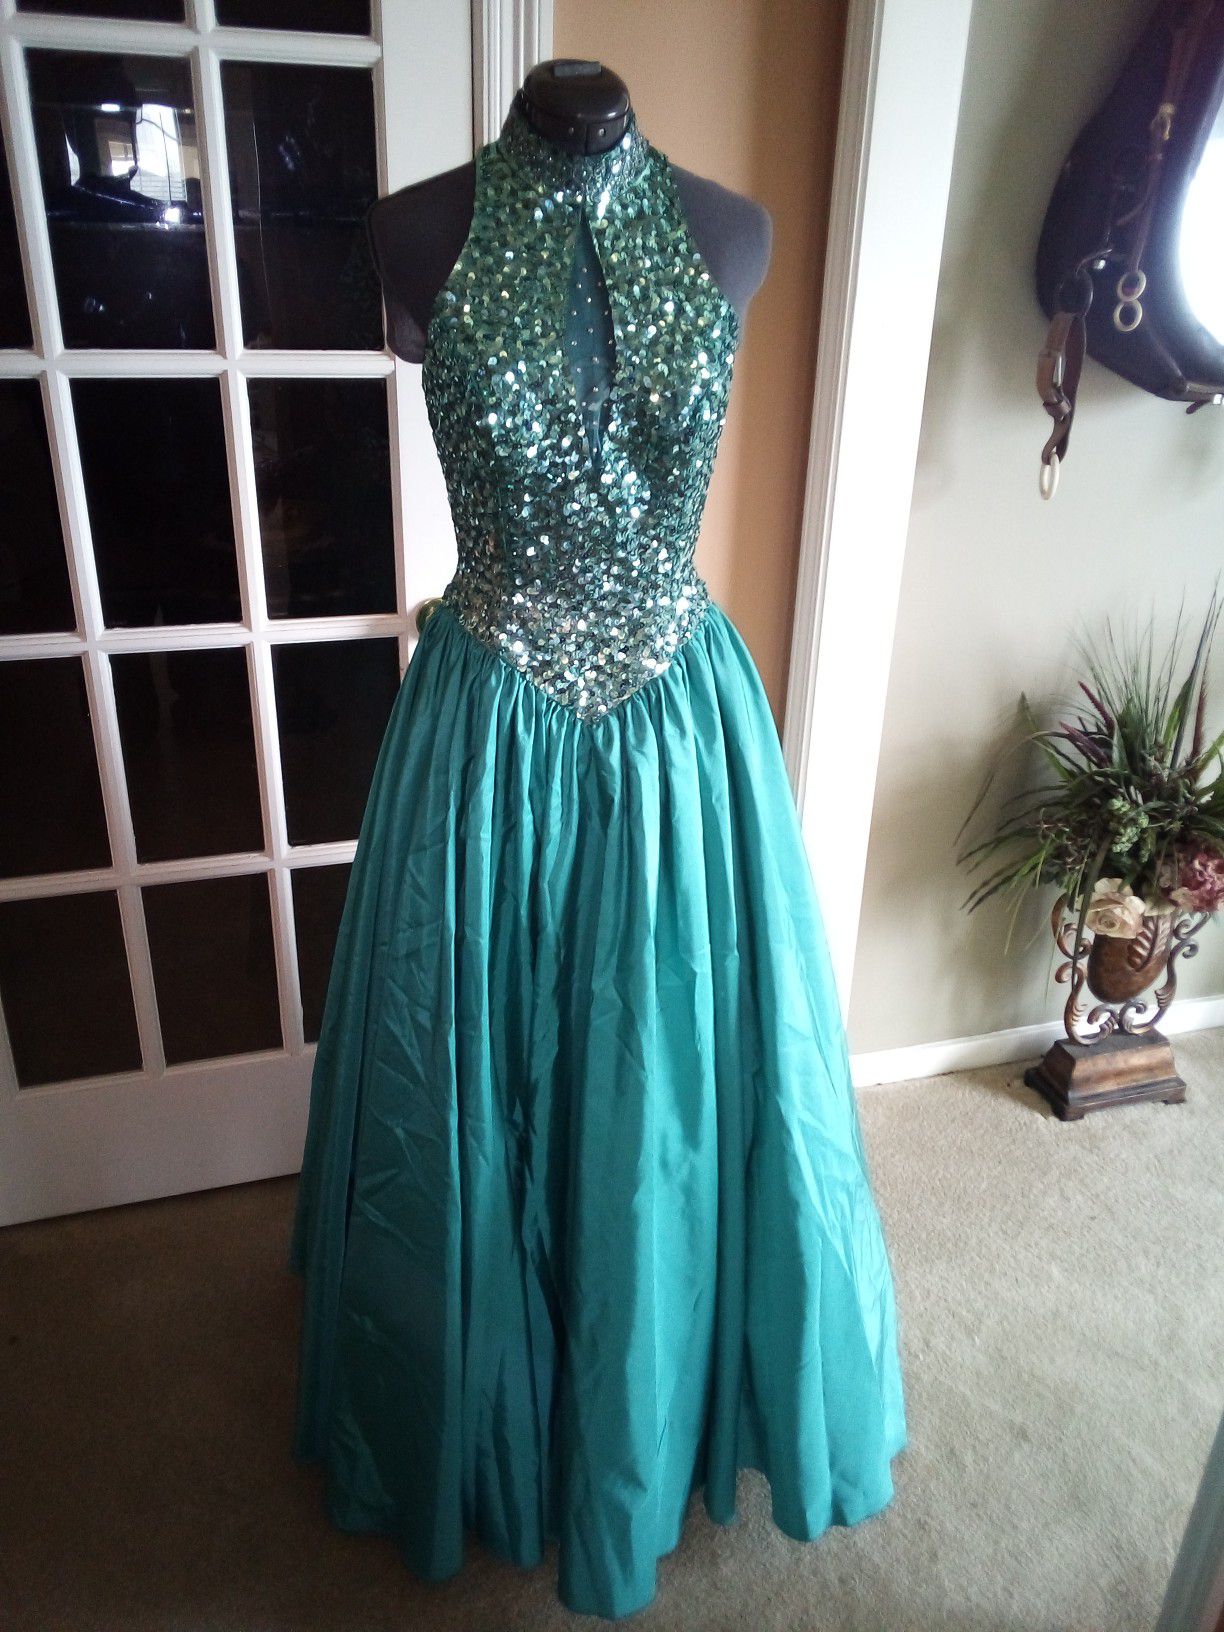 Mike Bennet Full length Formal/Prom/ Evening Dress size 12 Teal Green,